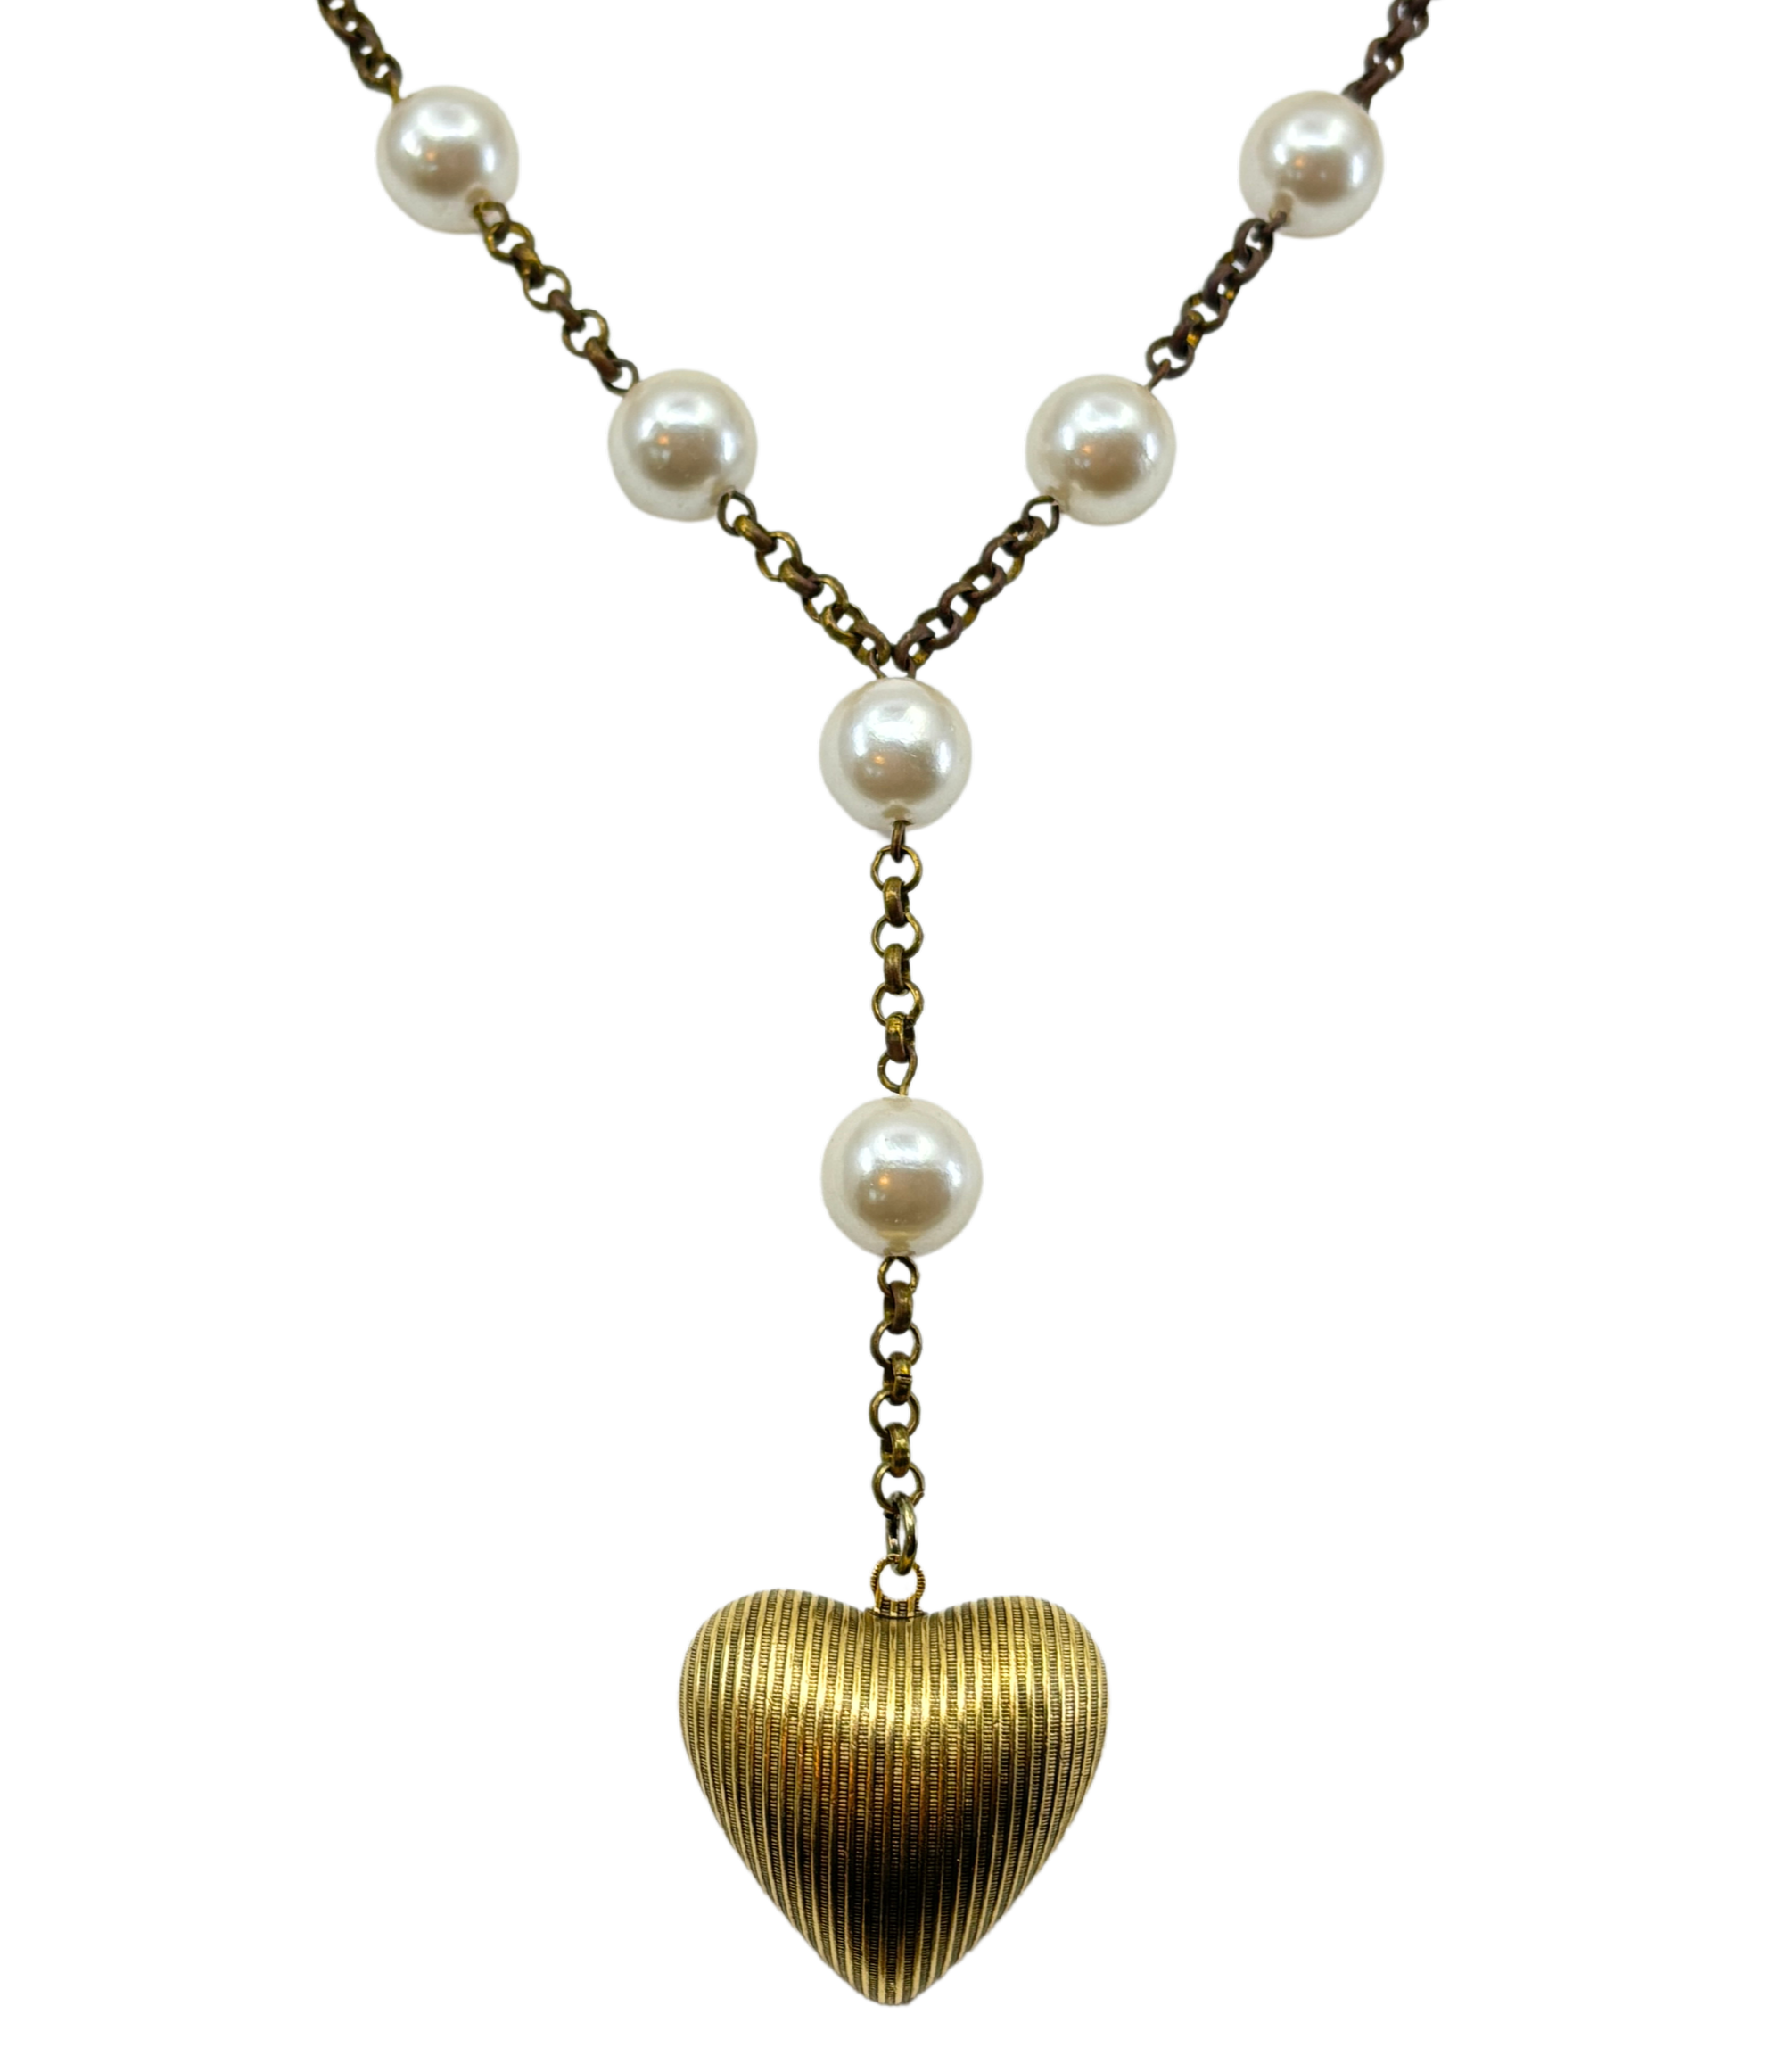 Limited Edition Brass Heart & Pearl Necklace